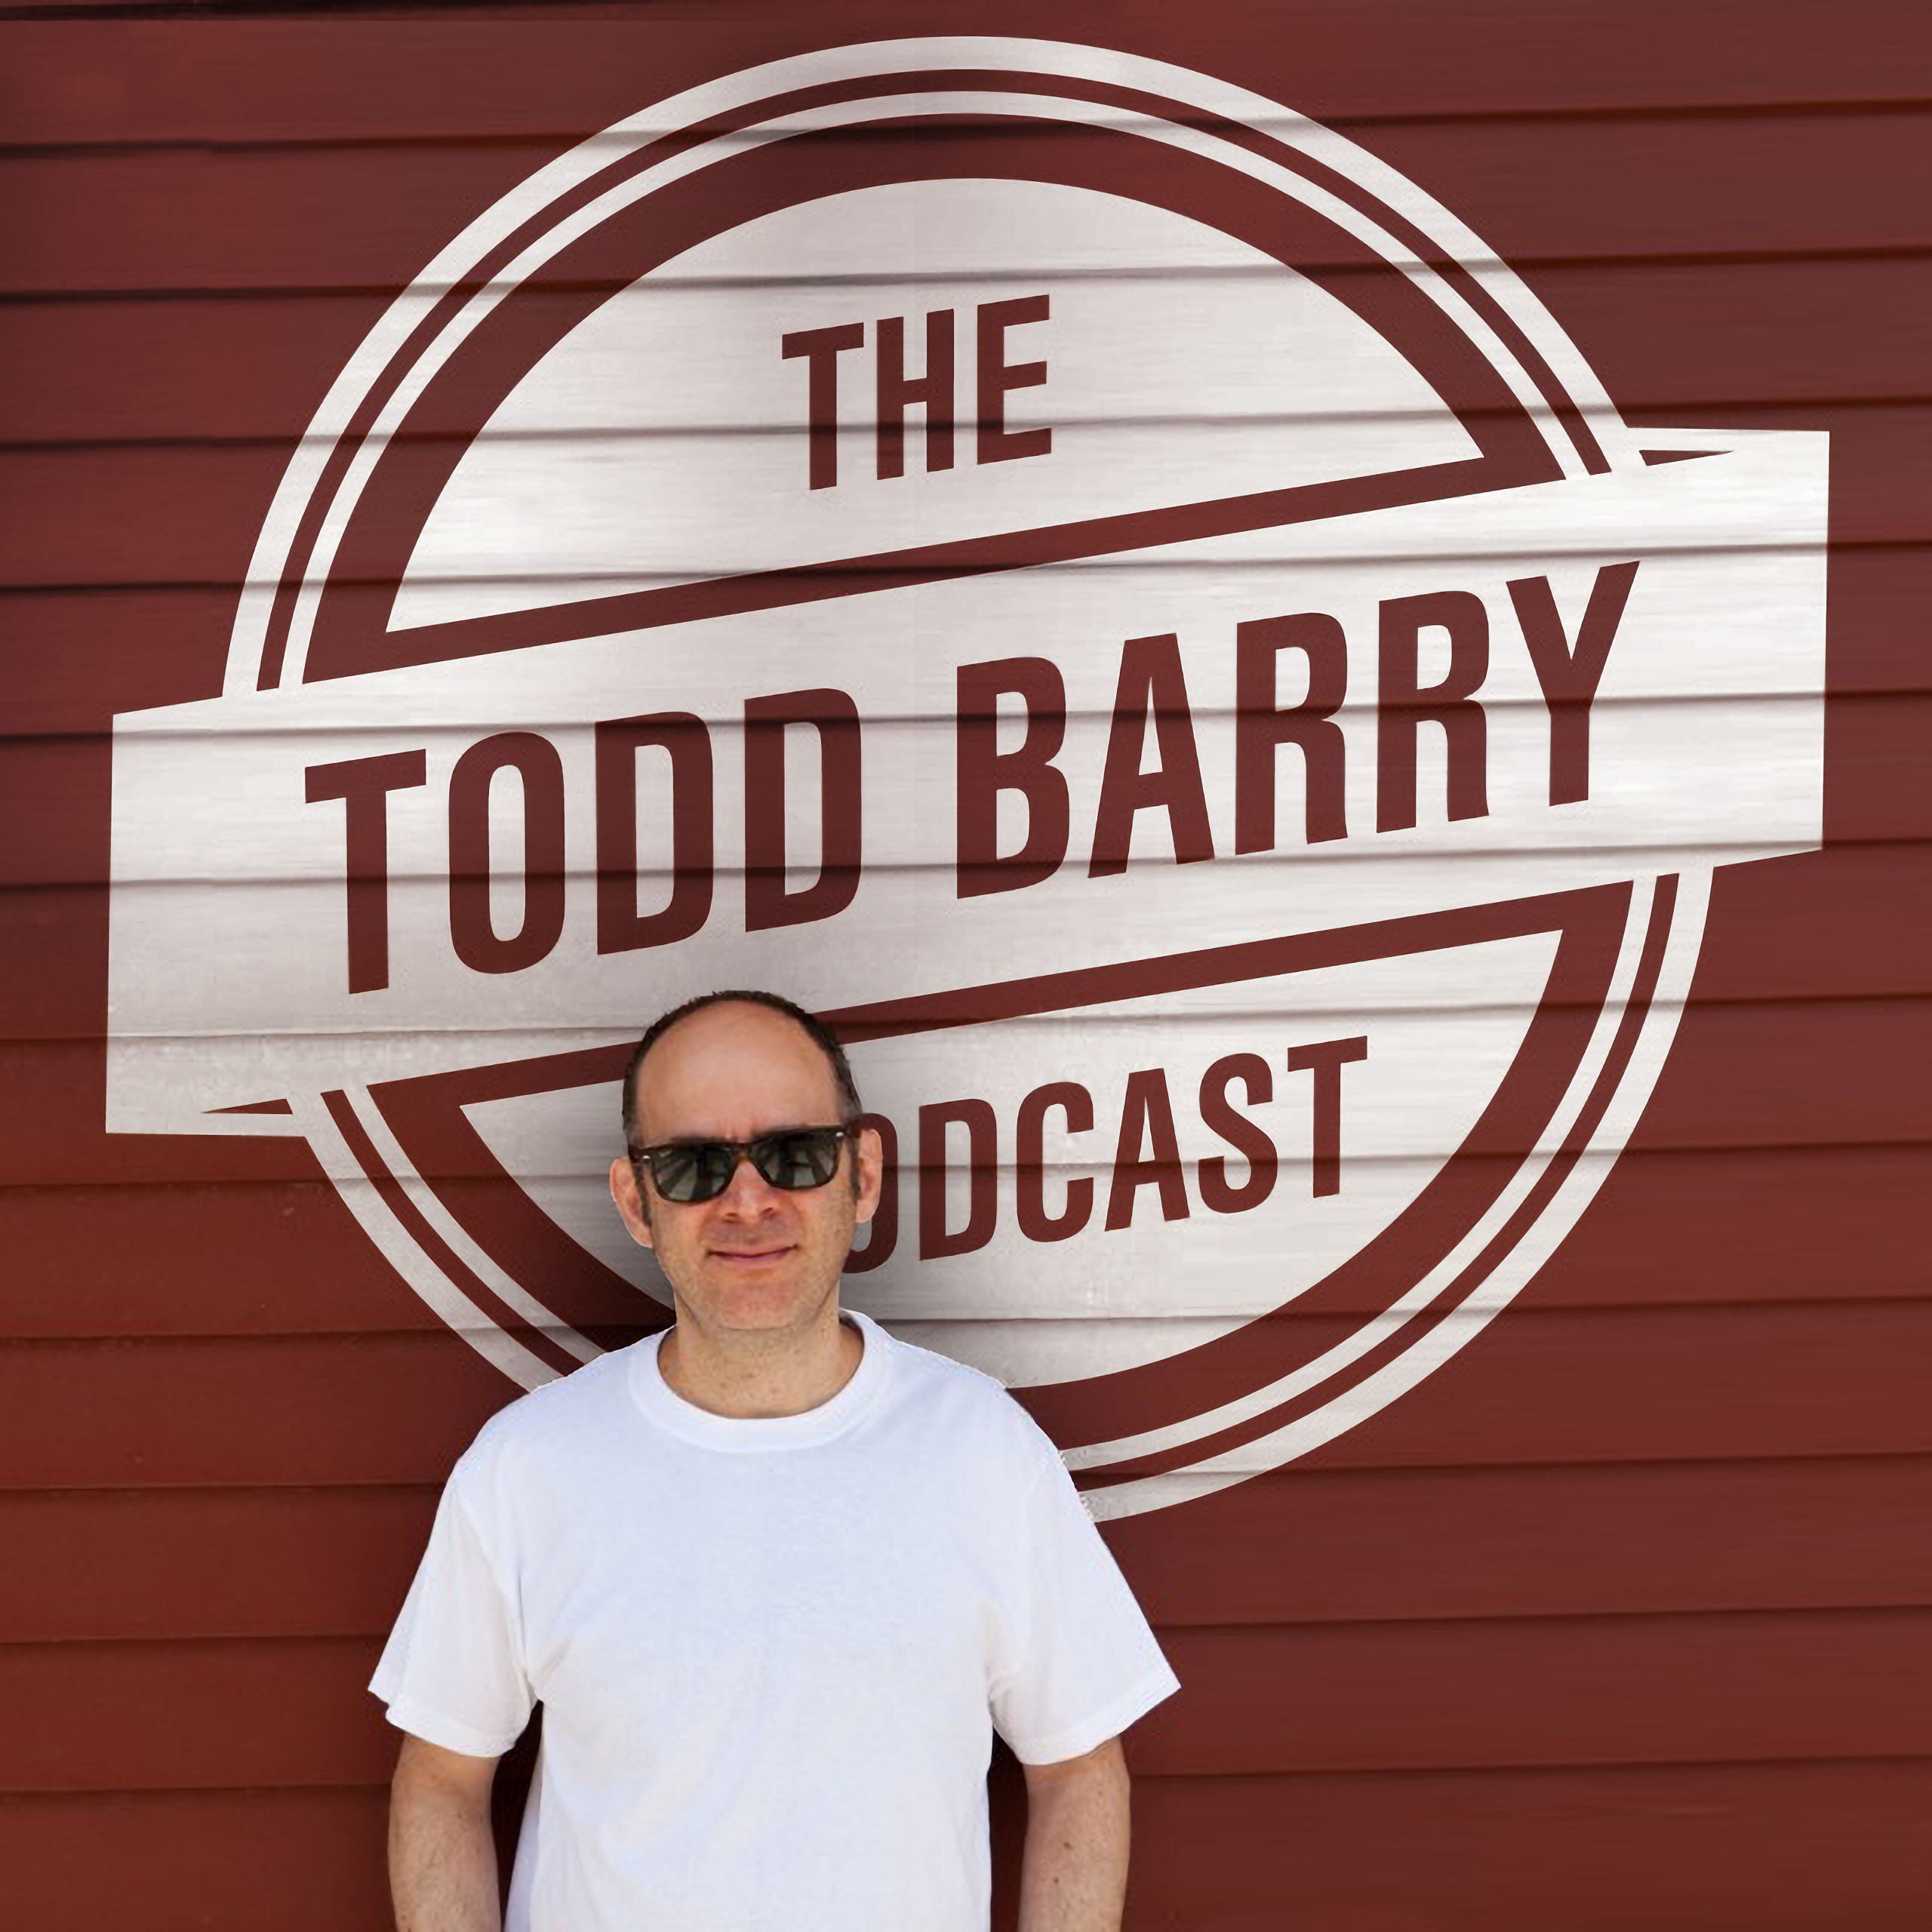 The Todd Barry Podcast Cover - Square